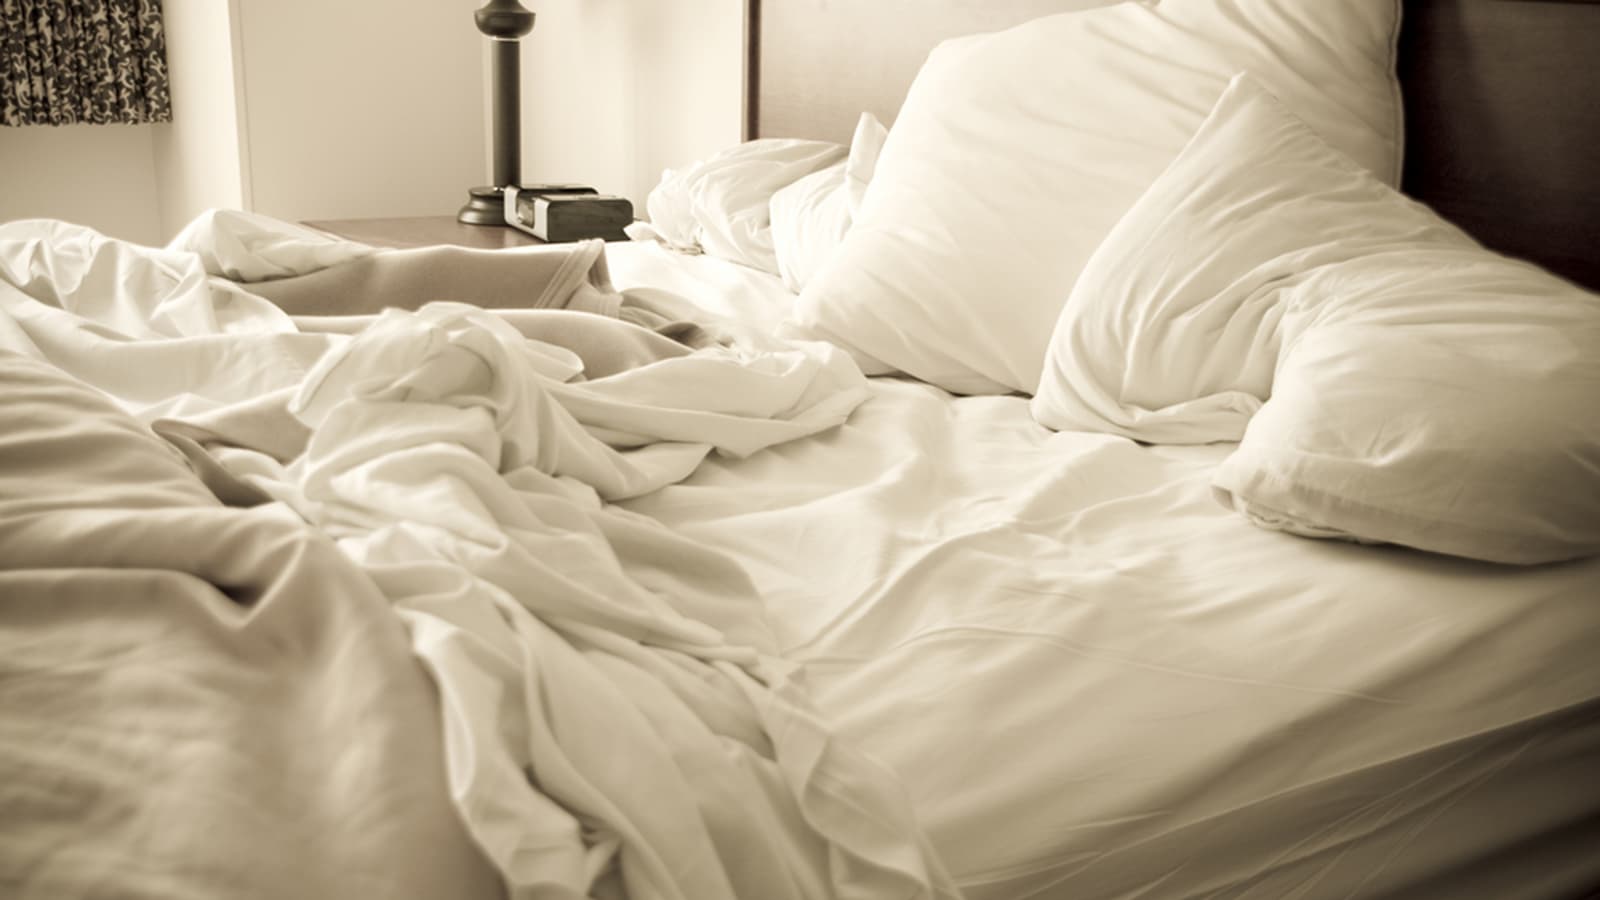 Don't Make Your Bed Day 2023: Date, History and 5 Above-Bed Sheet Facts